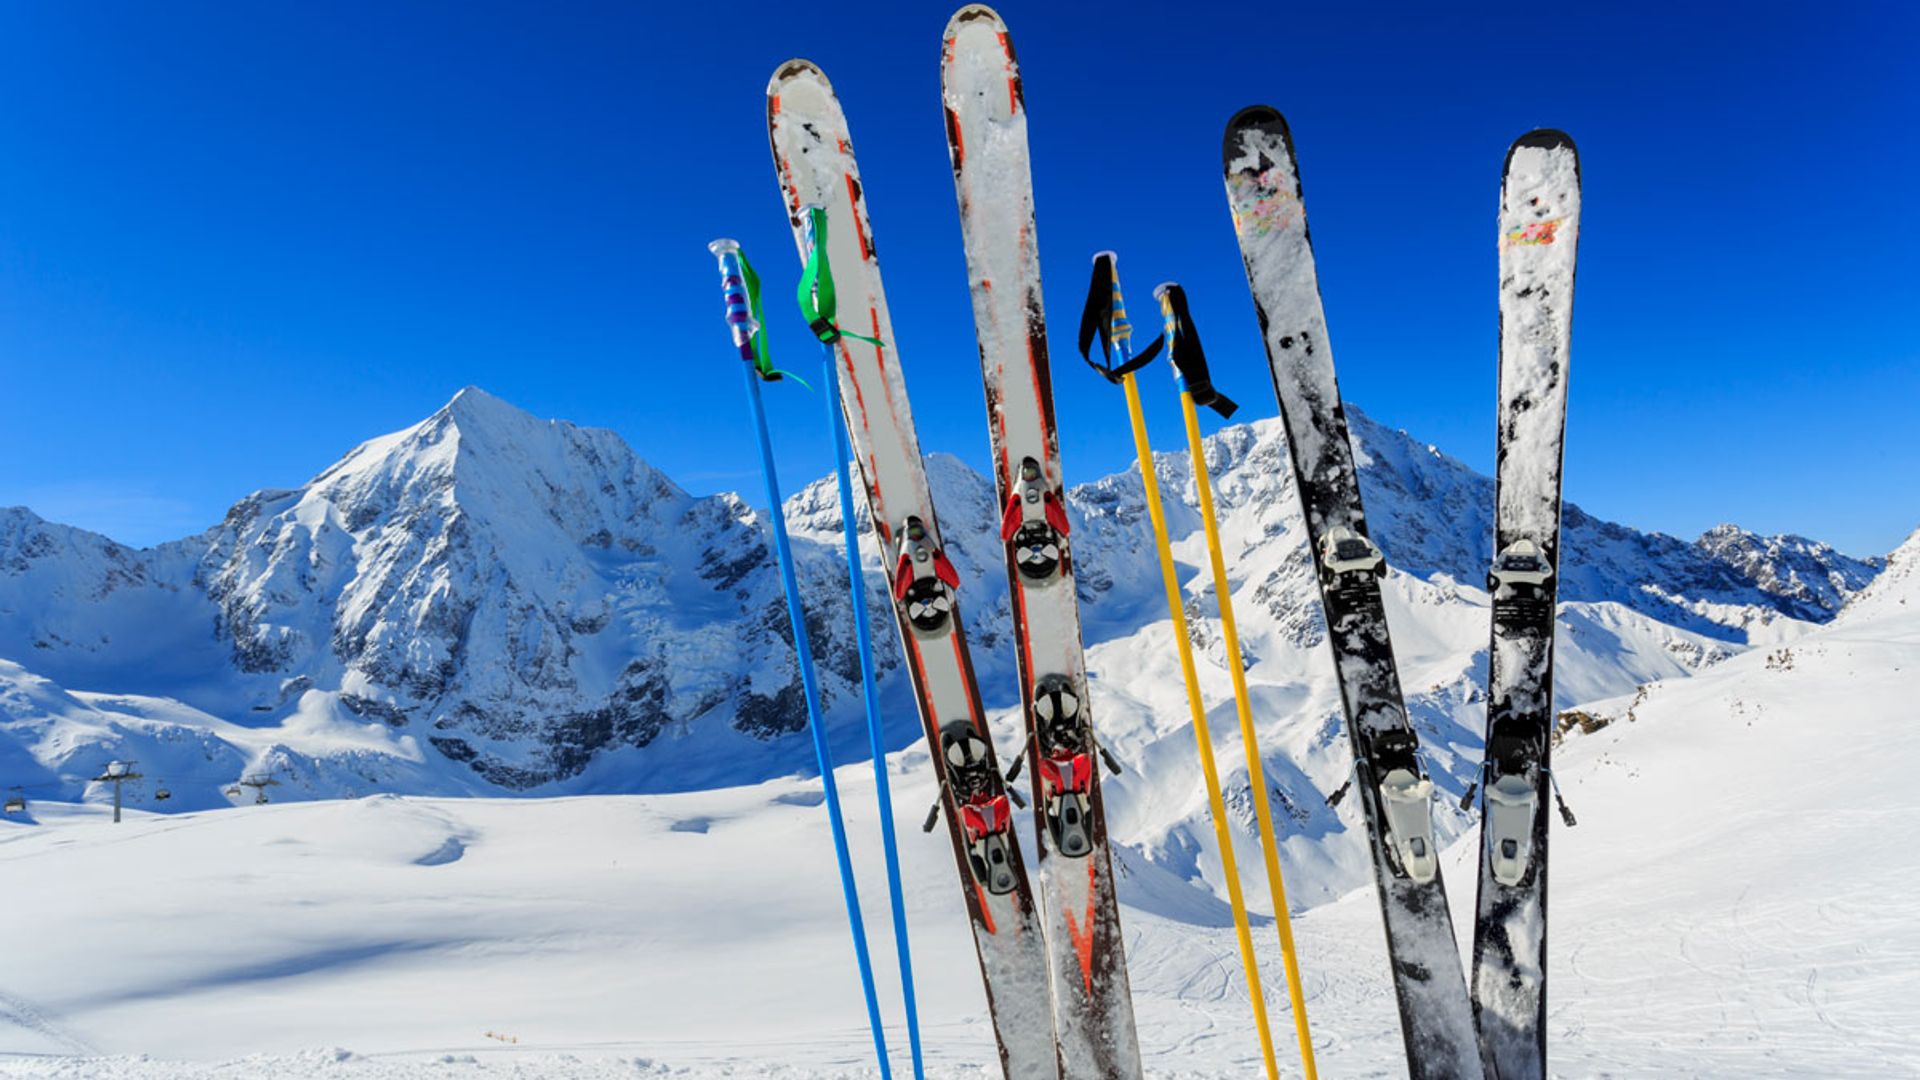 Time to hit the slopes! The top 7 places to ski this winter